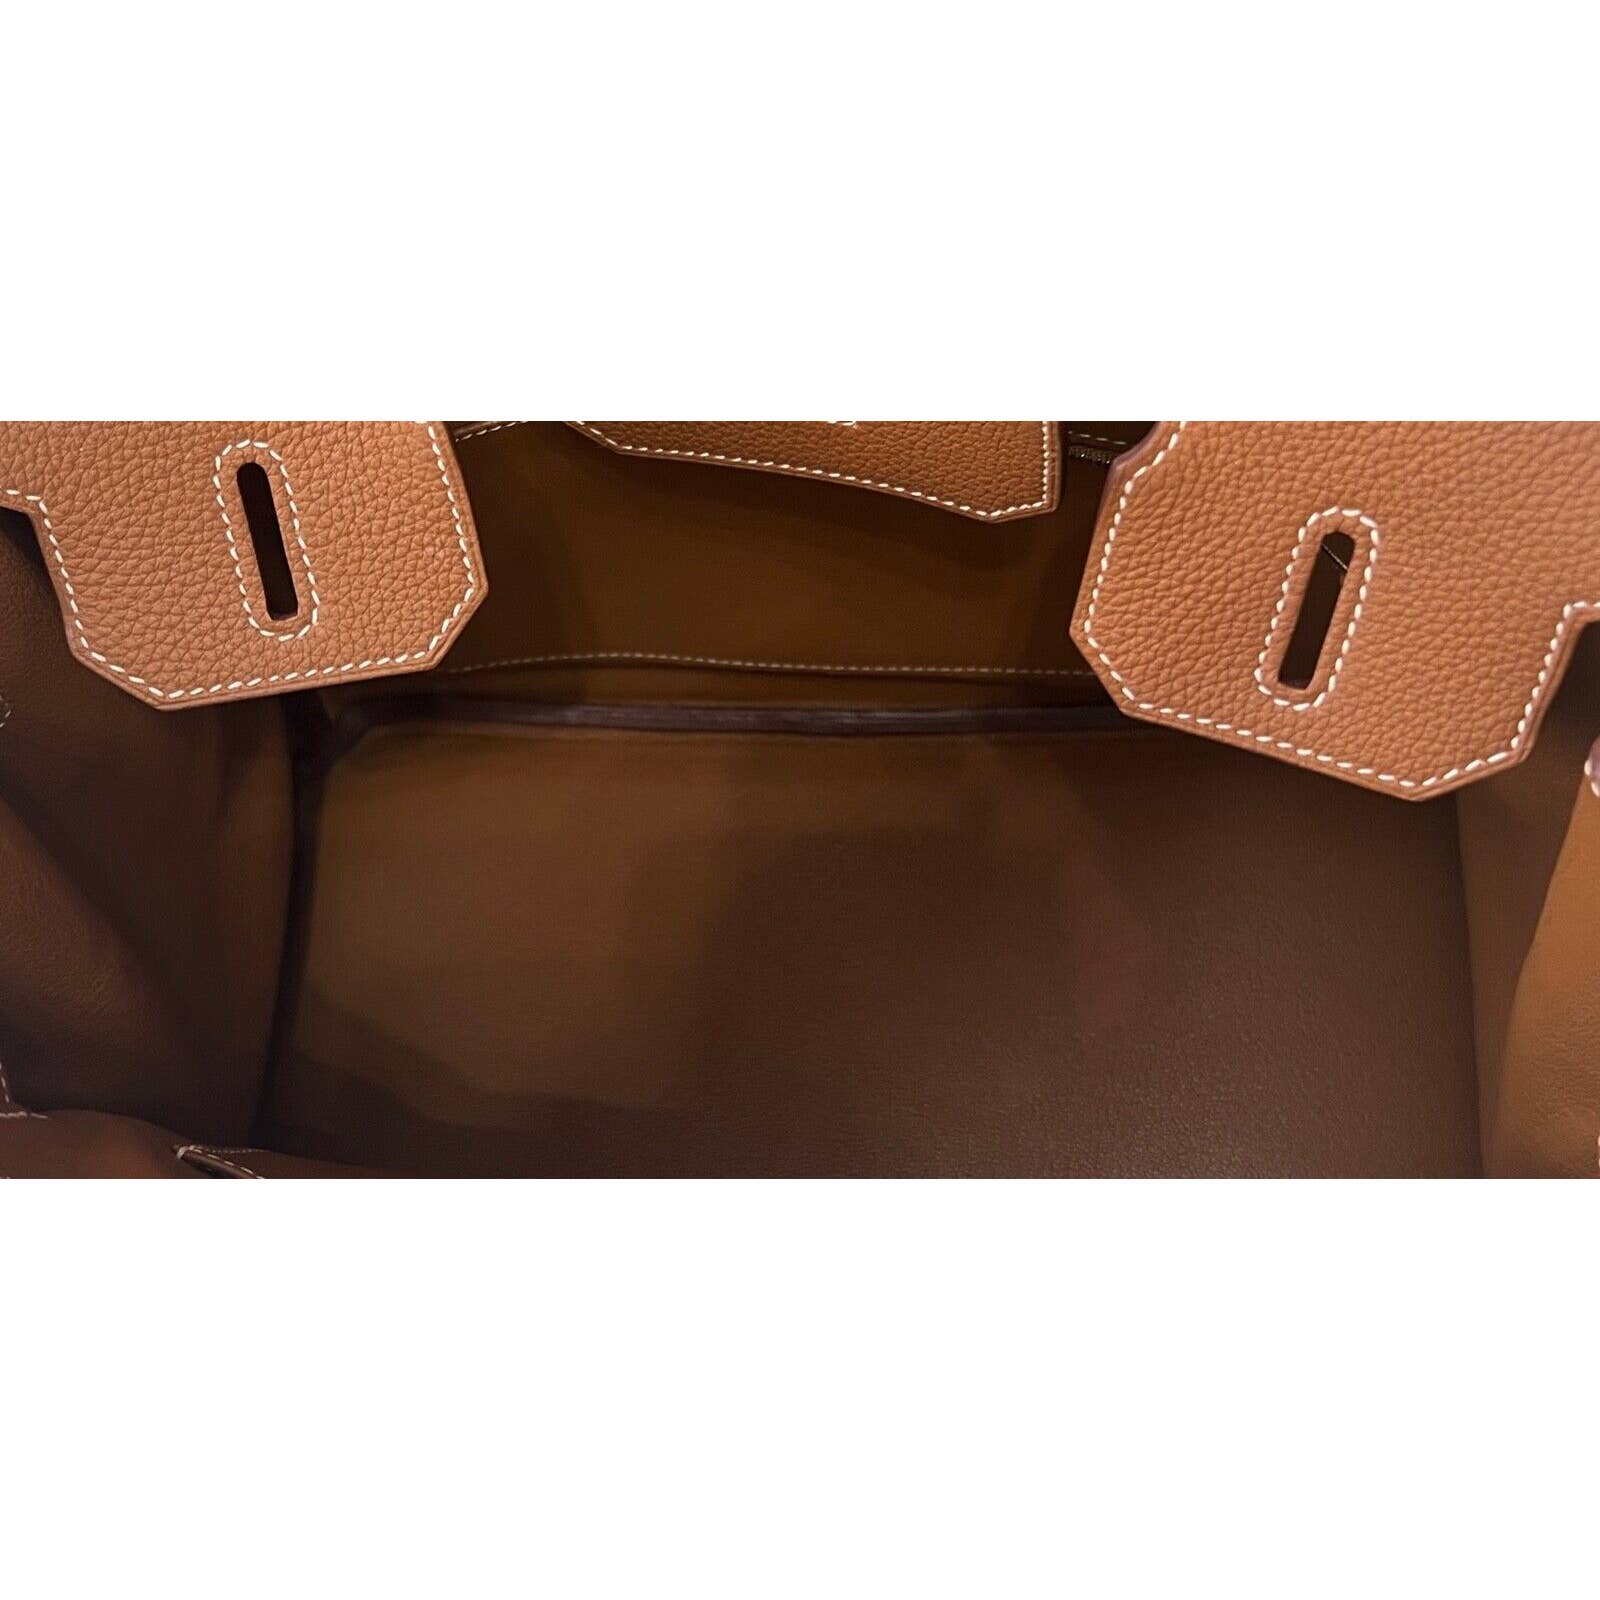 HERMÈS  BAMBOU BIRKIN 30 IN TOGO LEATHER WITH GOLD HARDWARE, 2019